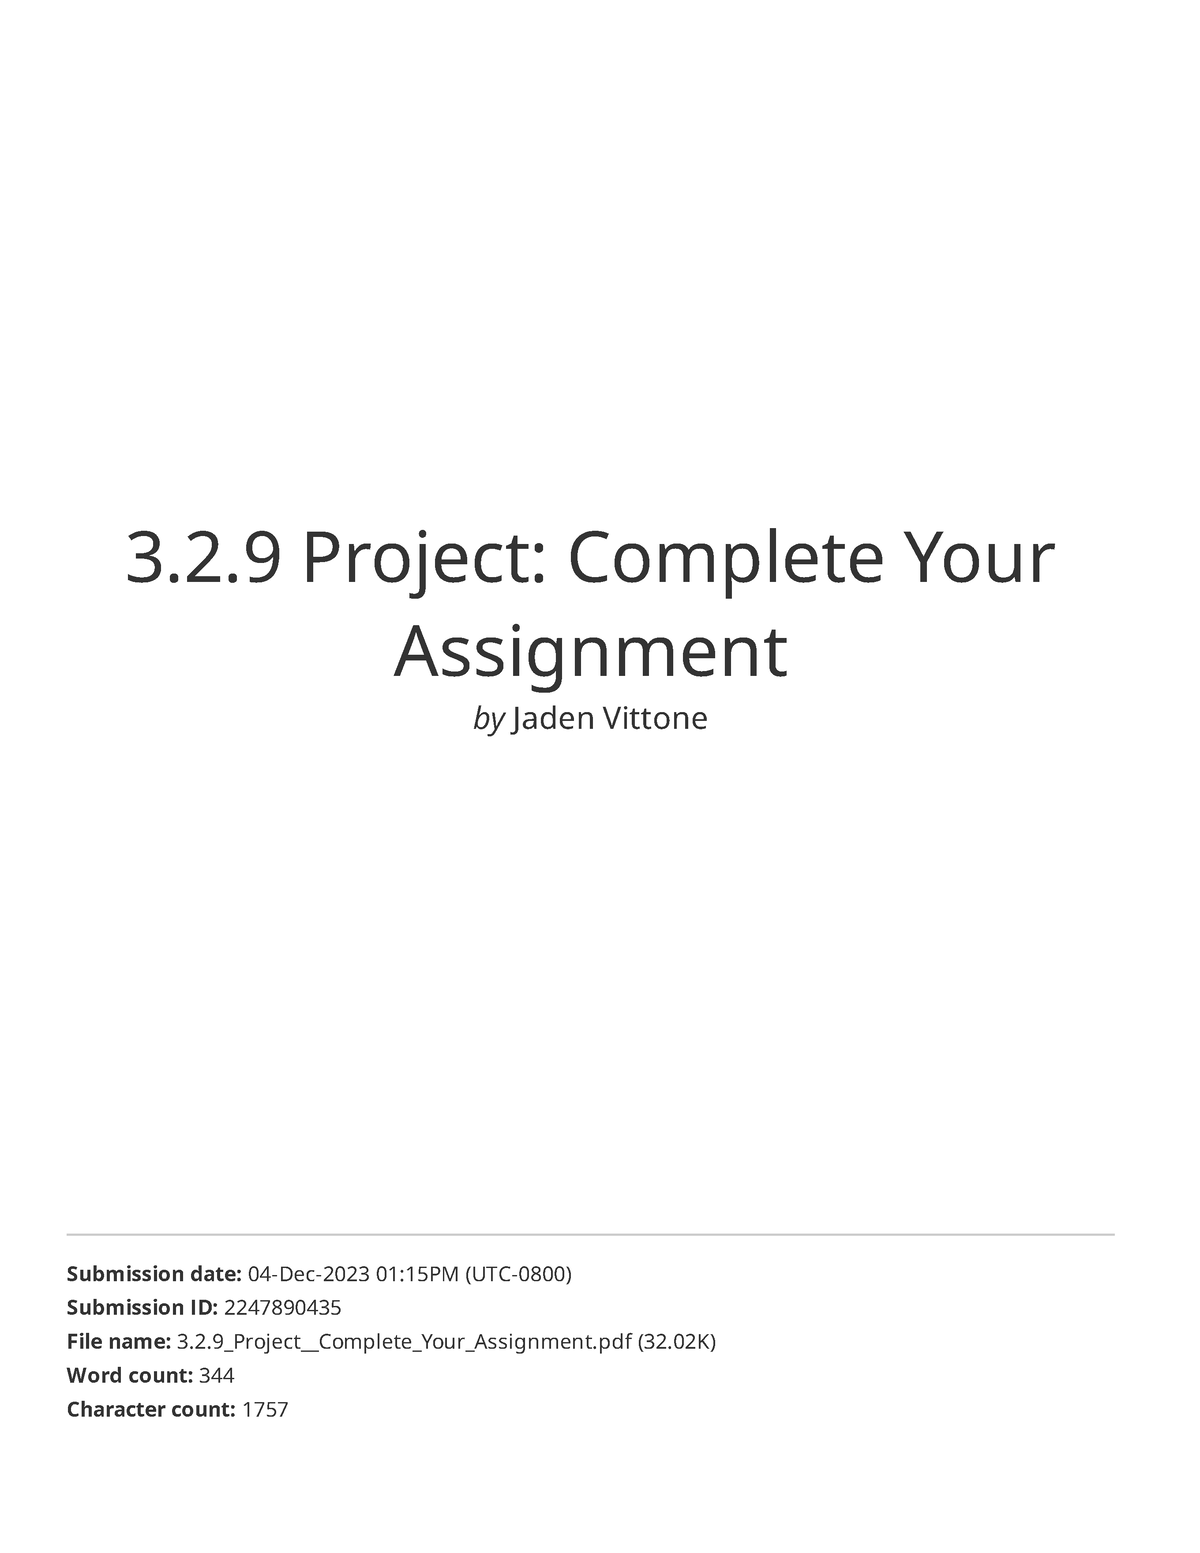 3.2.9 project complete your assignment